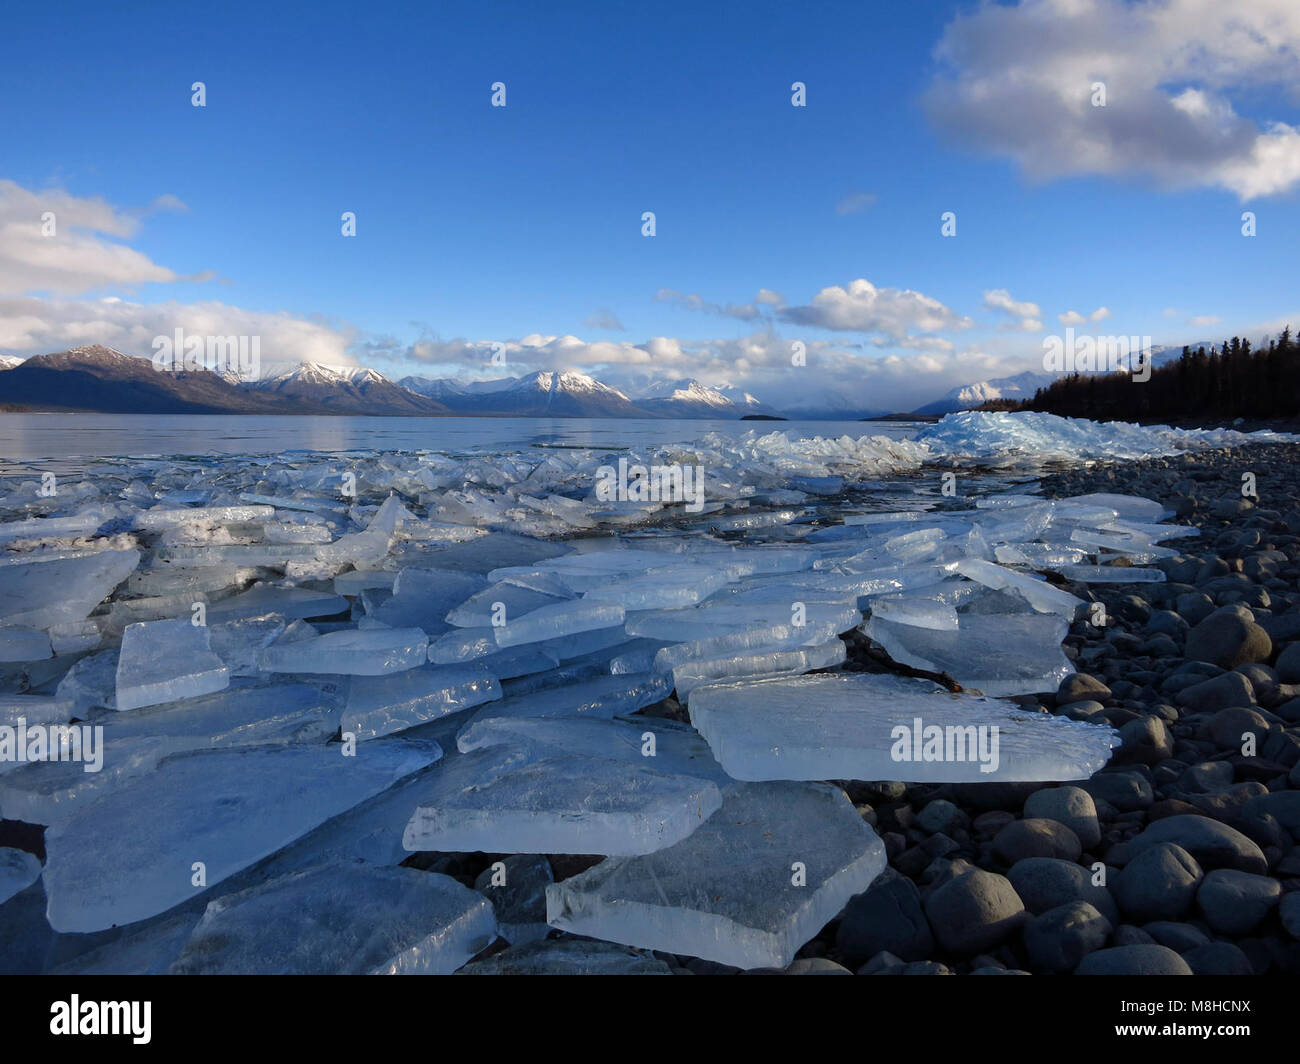 Ice Breakup. Shards of ice on the beach at Lake Clark as spring creeps in at the end of winter Stock Photo